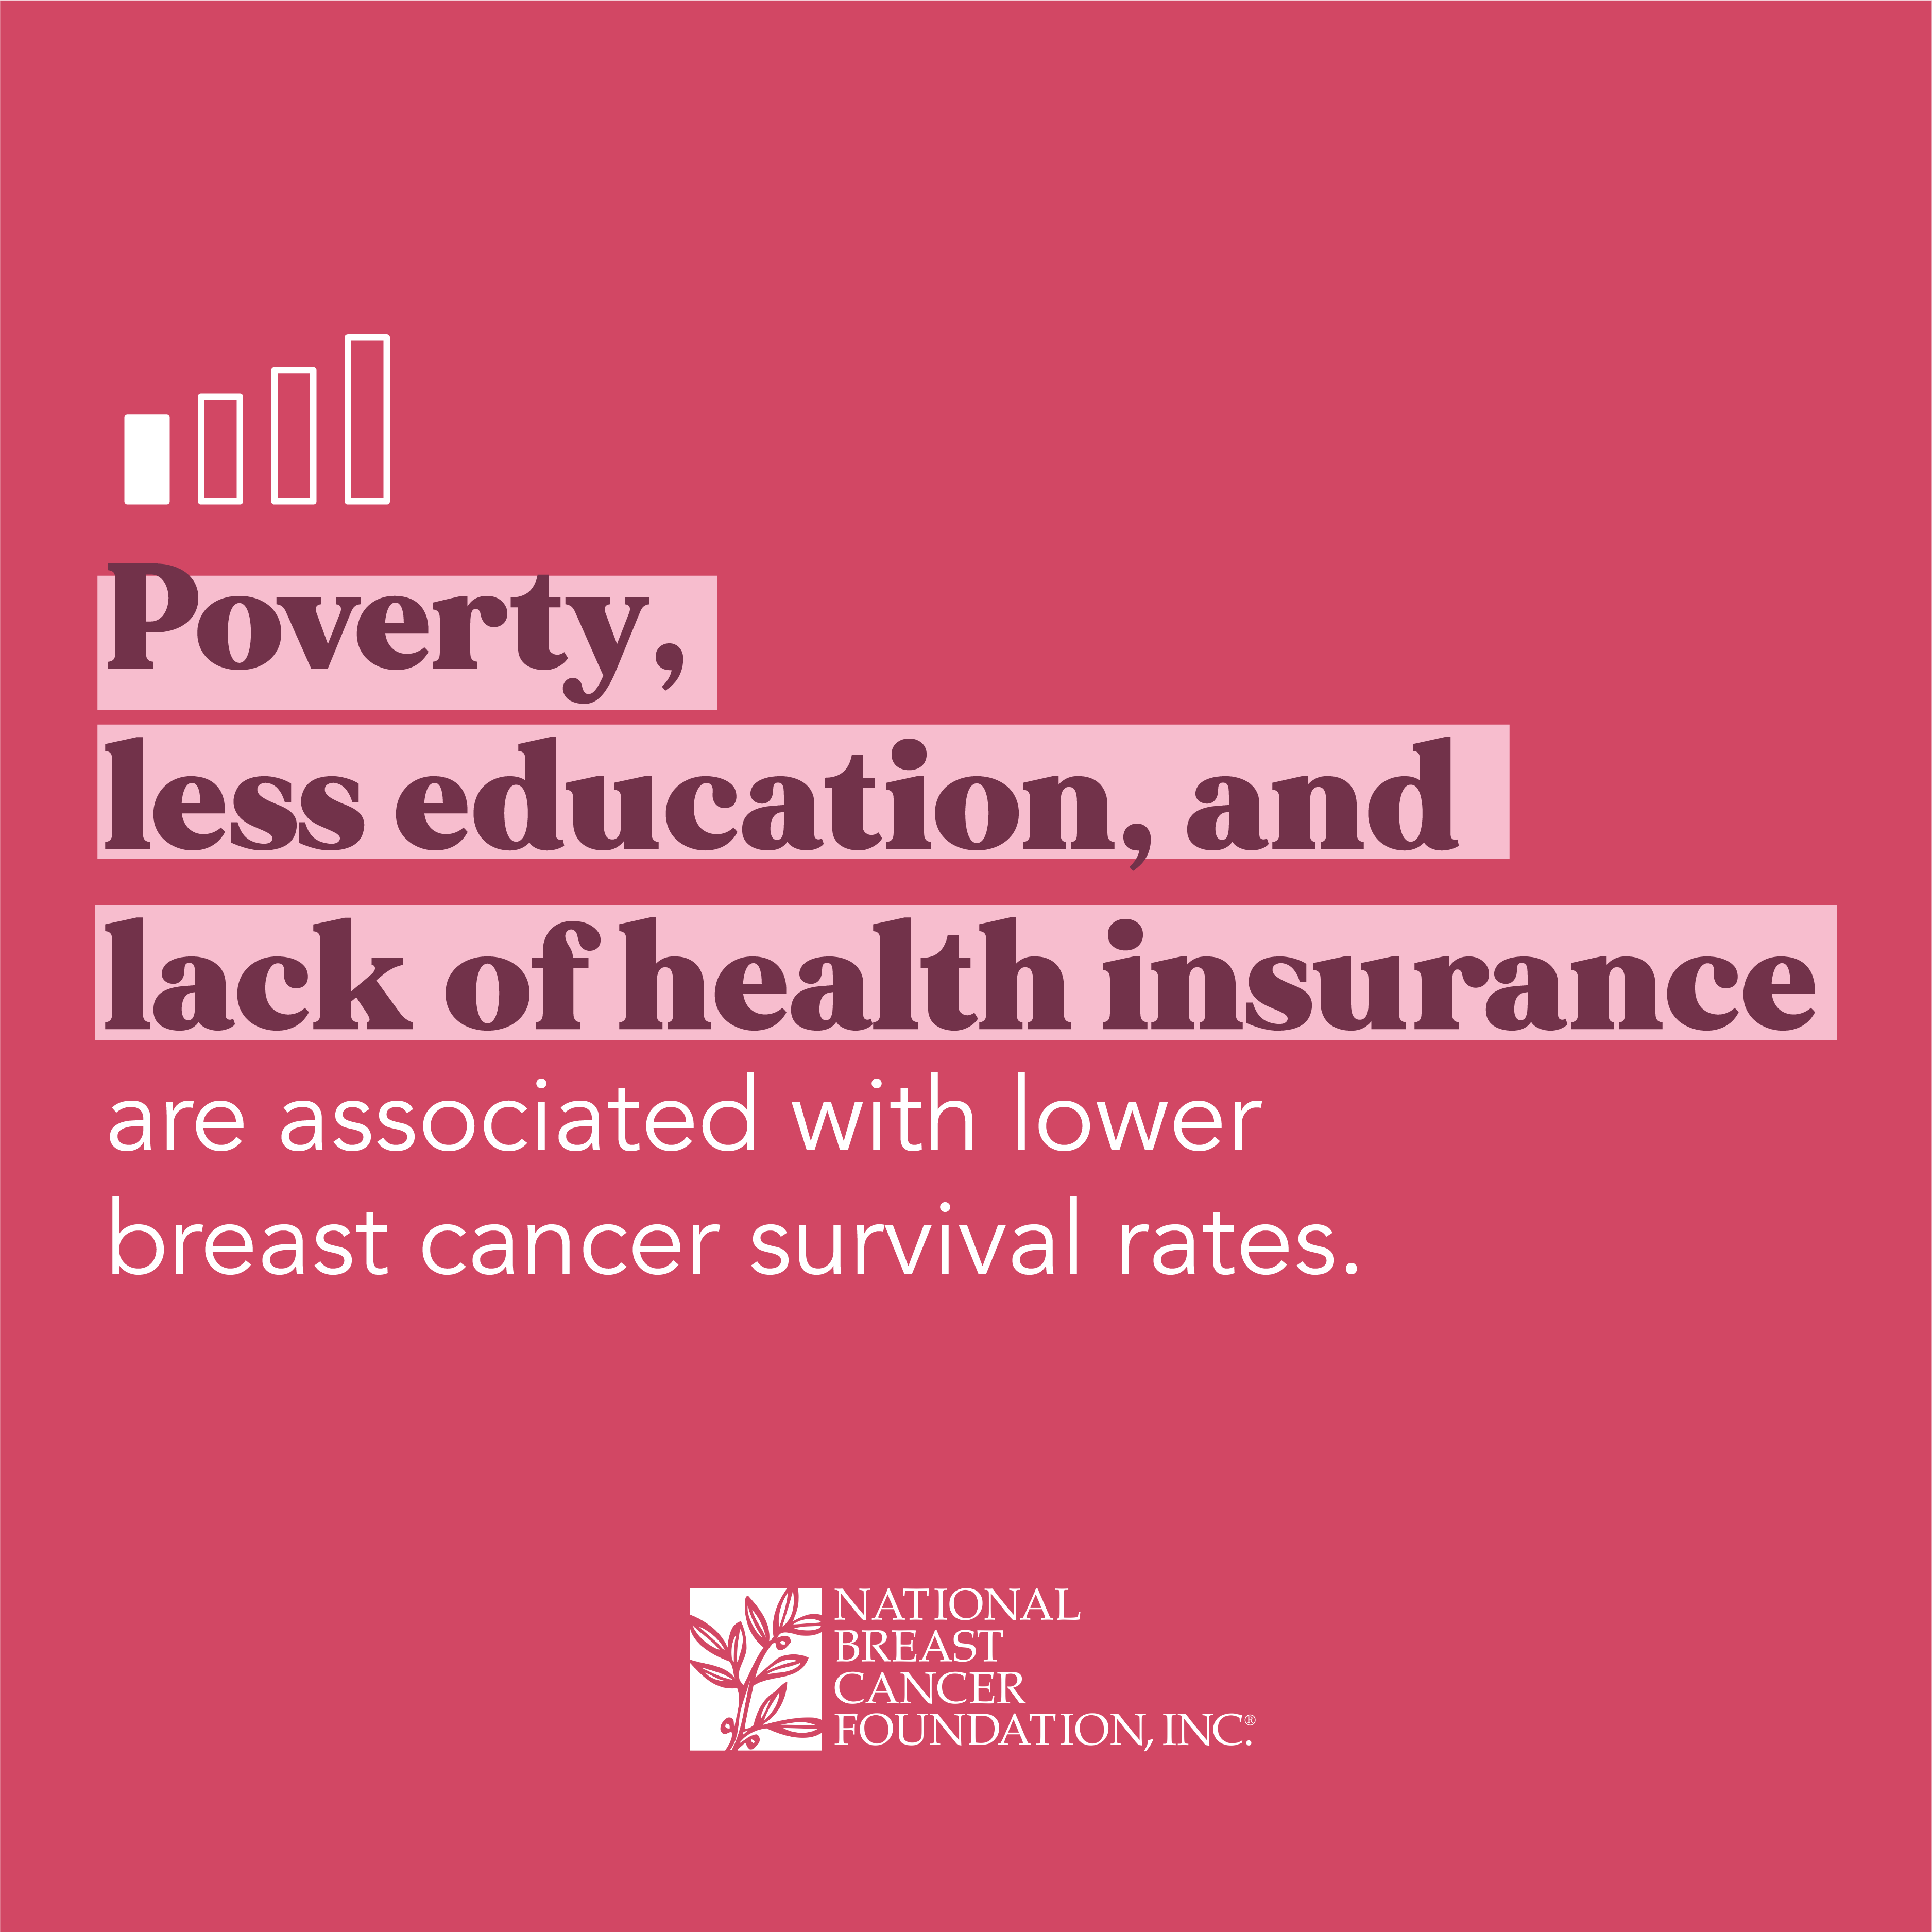 Poverty, less education, and lack of health insurance are associated with lower breast cancer survival rates